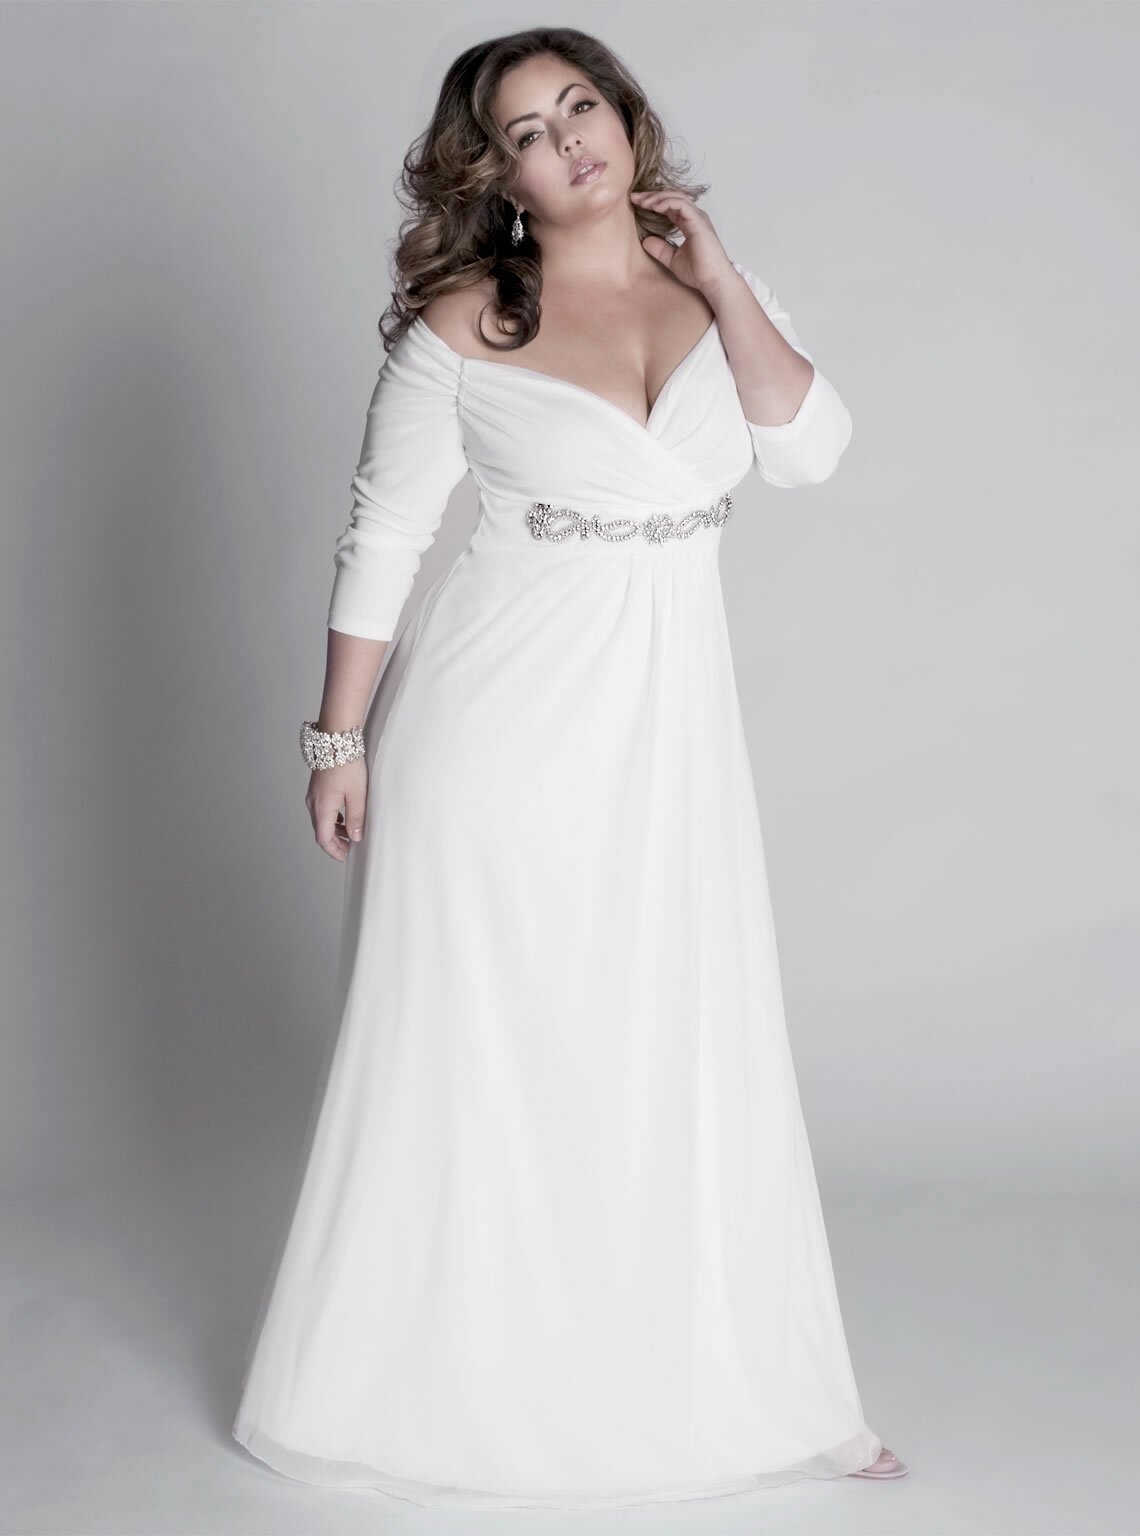 Wedding dresses plus size with sleeves Photo - 5